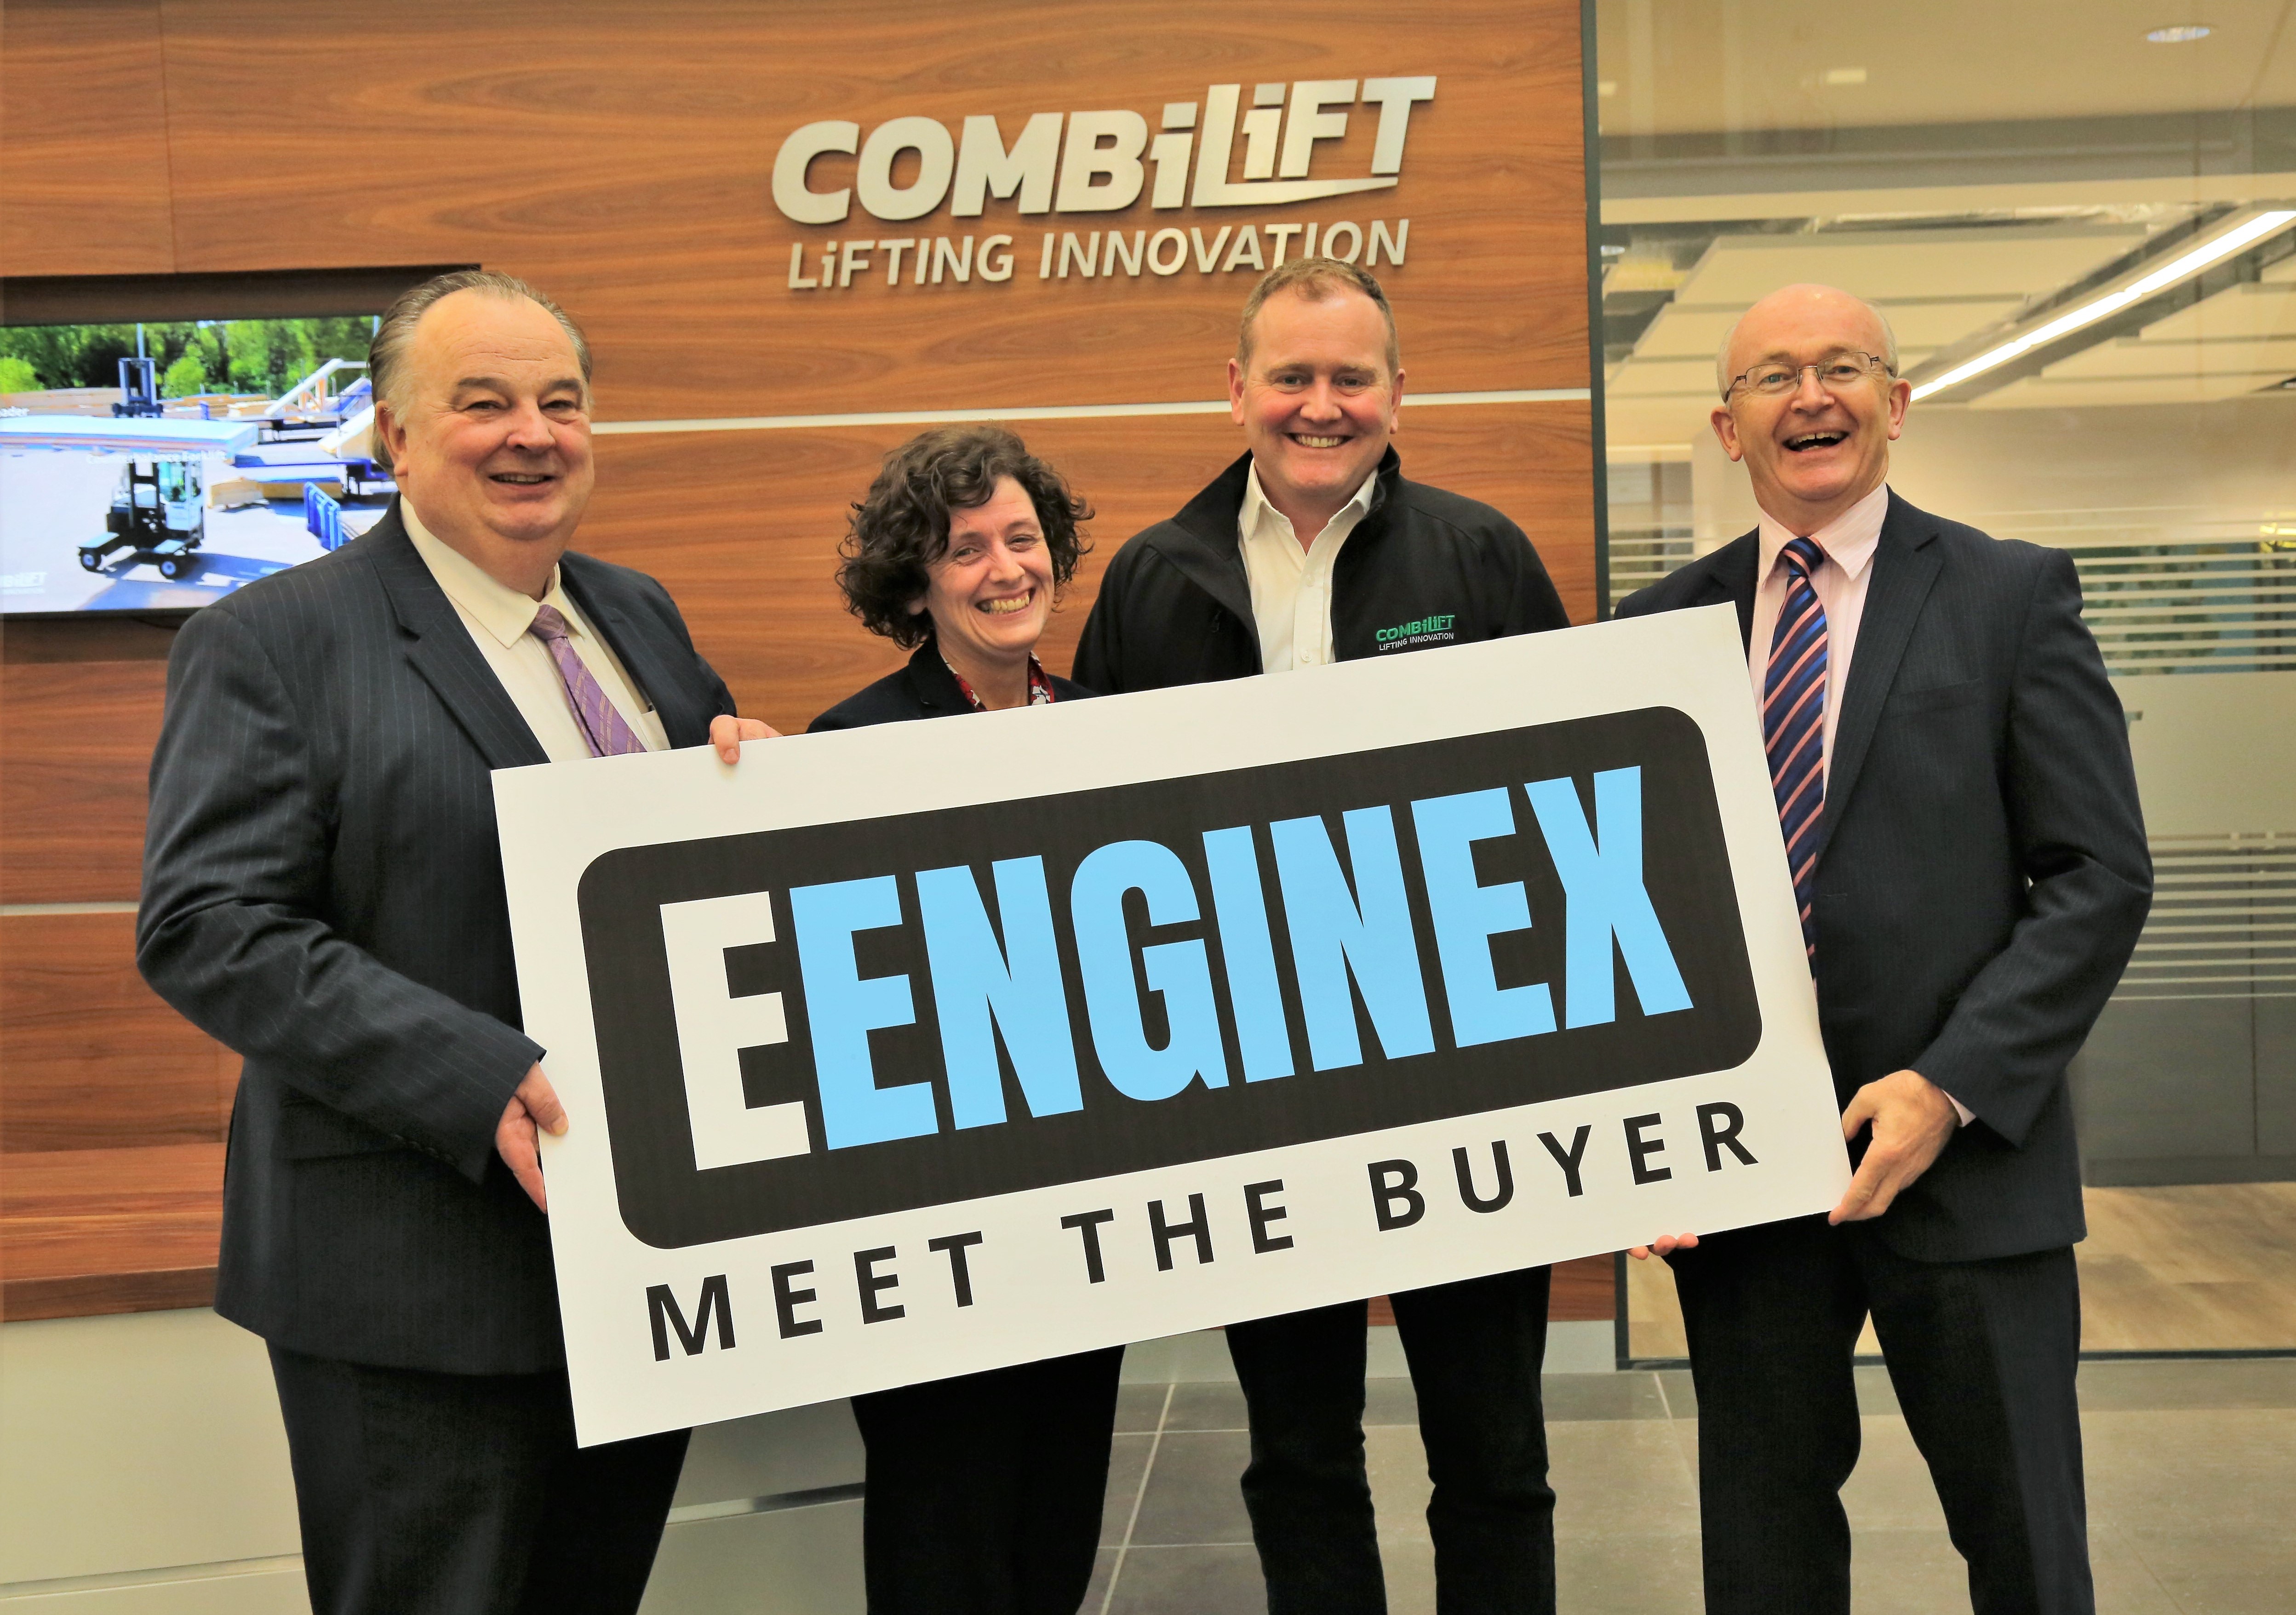 International Engineering Meet the Buyer Event to take place in Monaghan